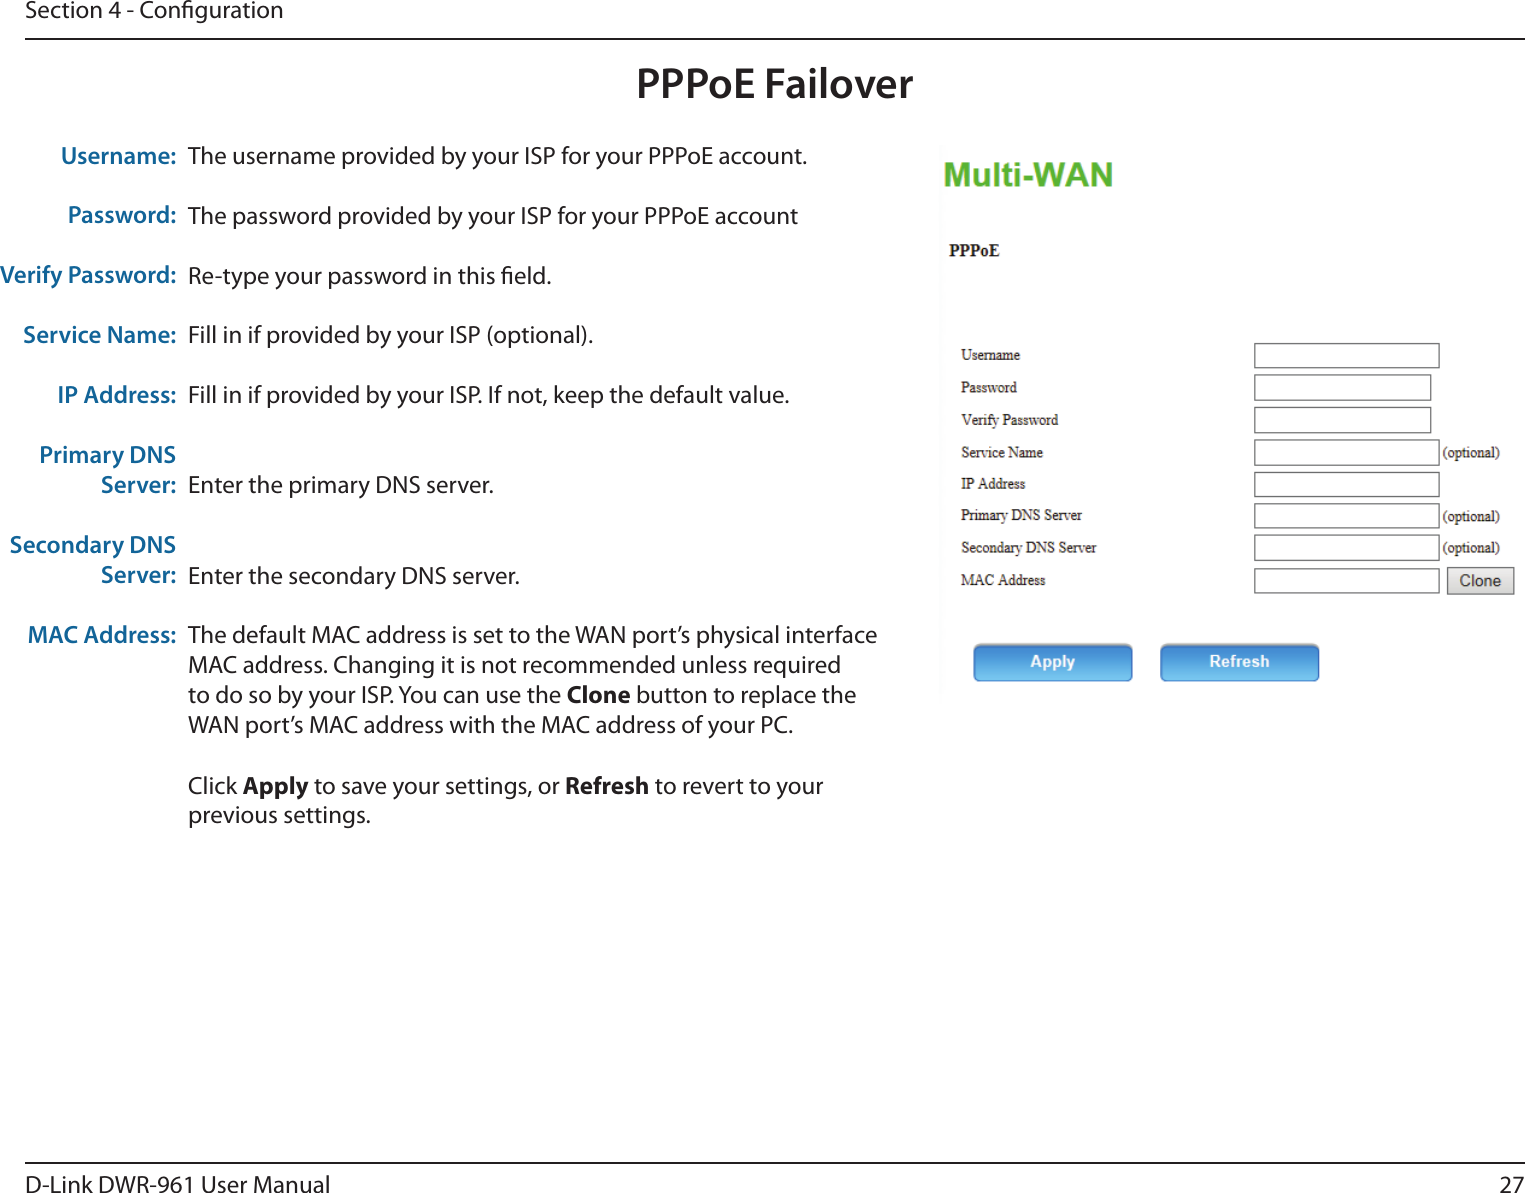 27D-Link DWR-961 User ManualSection 4 - CongurationPPPoE FailoverThe username provided by your ISP for your PPPoE account.The password provided by your ISP for your PPPoE accountRe-type your password in this eld.Fill in if provided by your ISP (optional).Fill in if provided by your ISP. If not, keep the default value.Enter the primary DNS server.Enter the secondary DNS server.The default MAC address is set to the WAN port’s physical interface MAC address. Changing it is not recommended unless required to do so by your ISP. You can use the Clone button to replace the WAN port’s MAC address with the MAC address of your PC.Click Apply to save your settings, or Refresh to revert to your previous settings.Username:Password:Verify Password:Service Name:IP Address:Primary DNS Server:Secondary DNS Server:MAC Address: